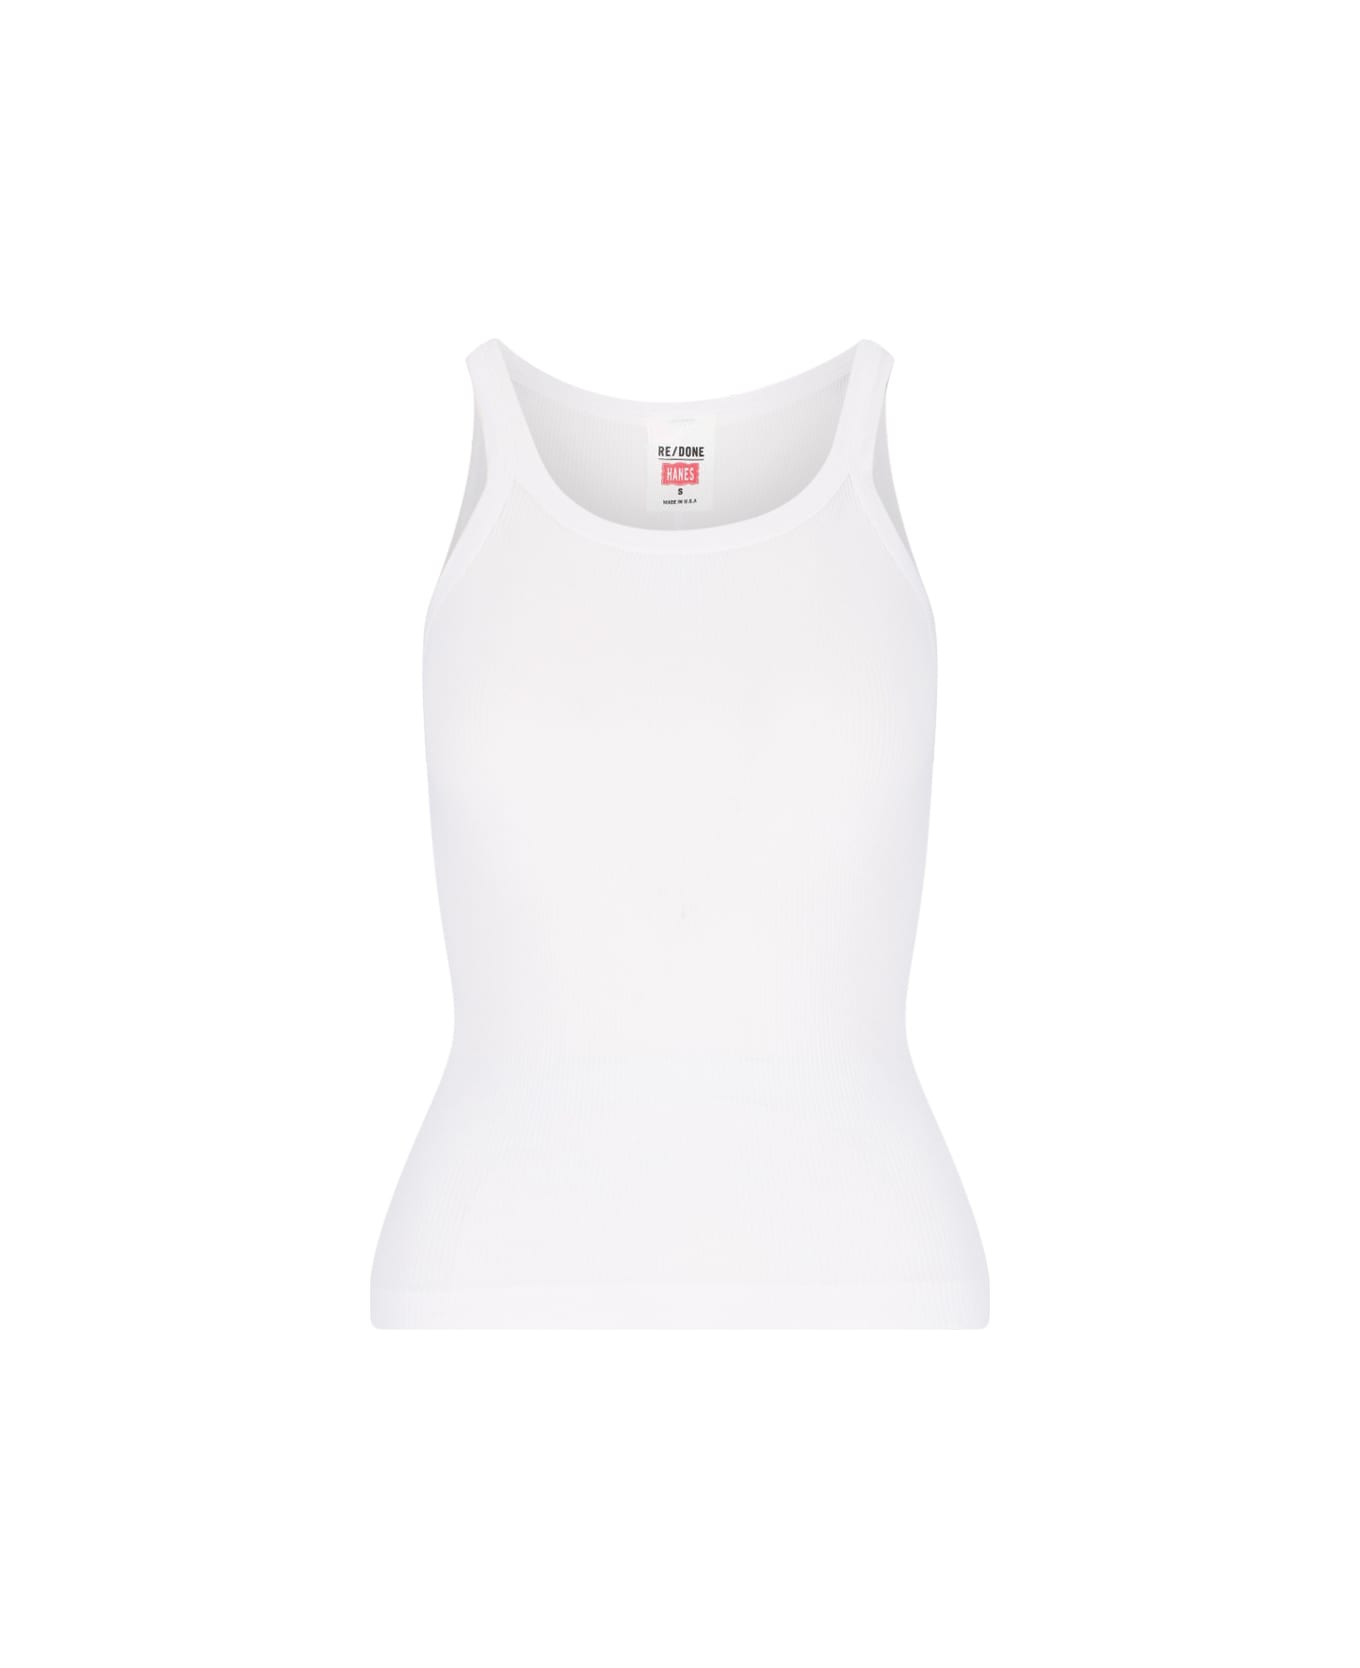 RE/DONE - ribbed Tank Top - White